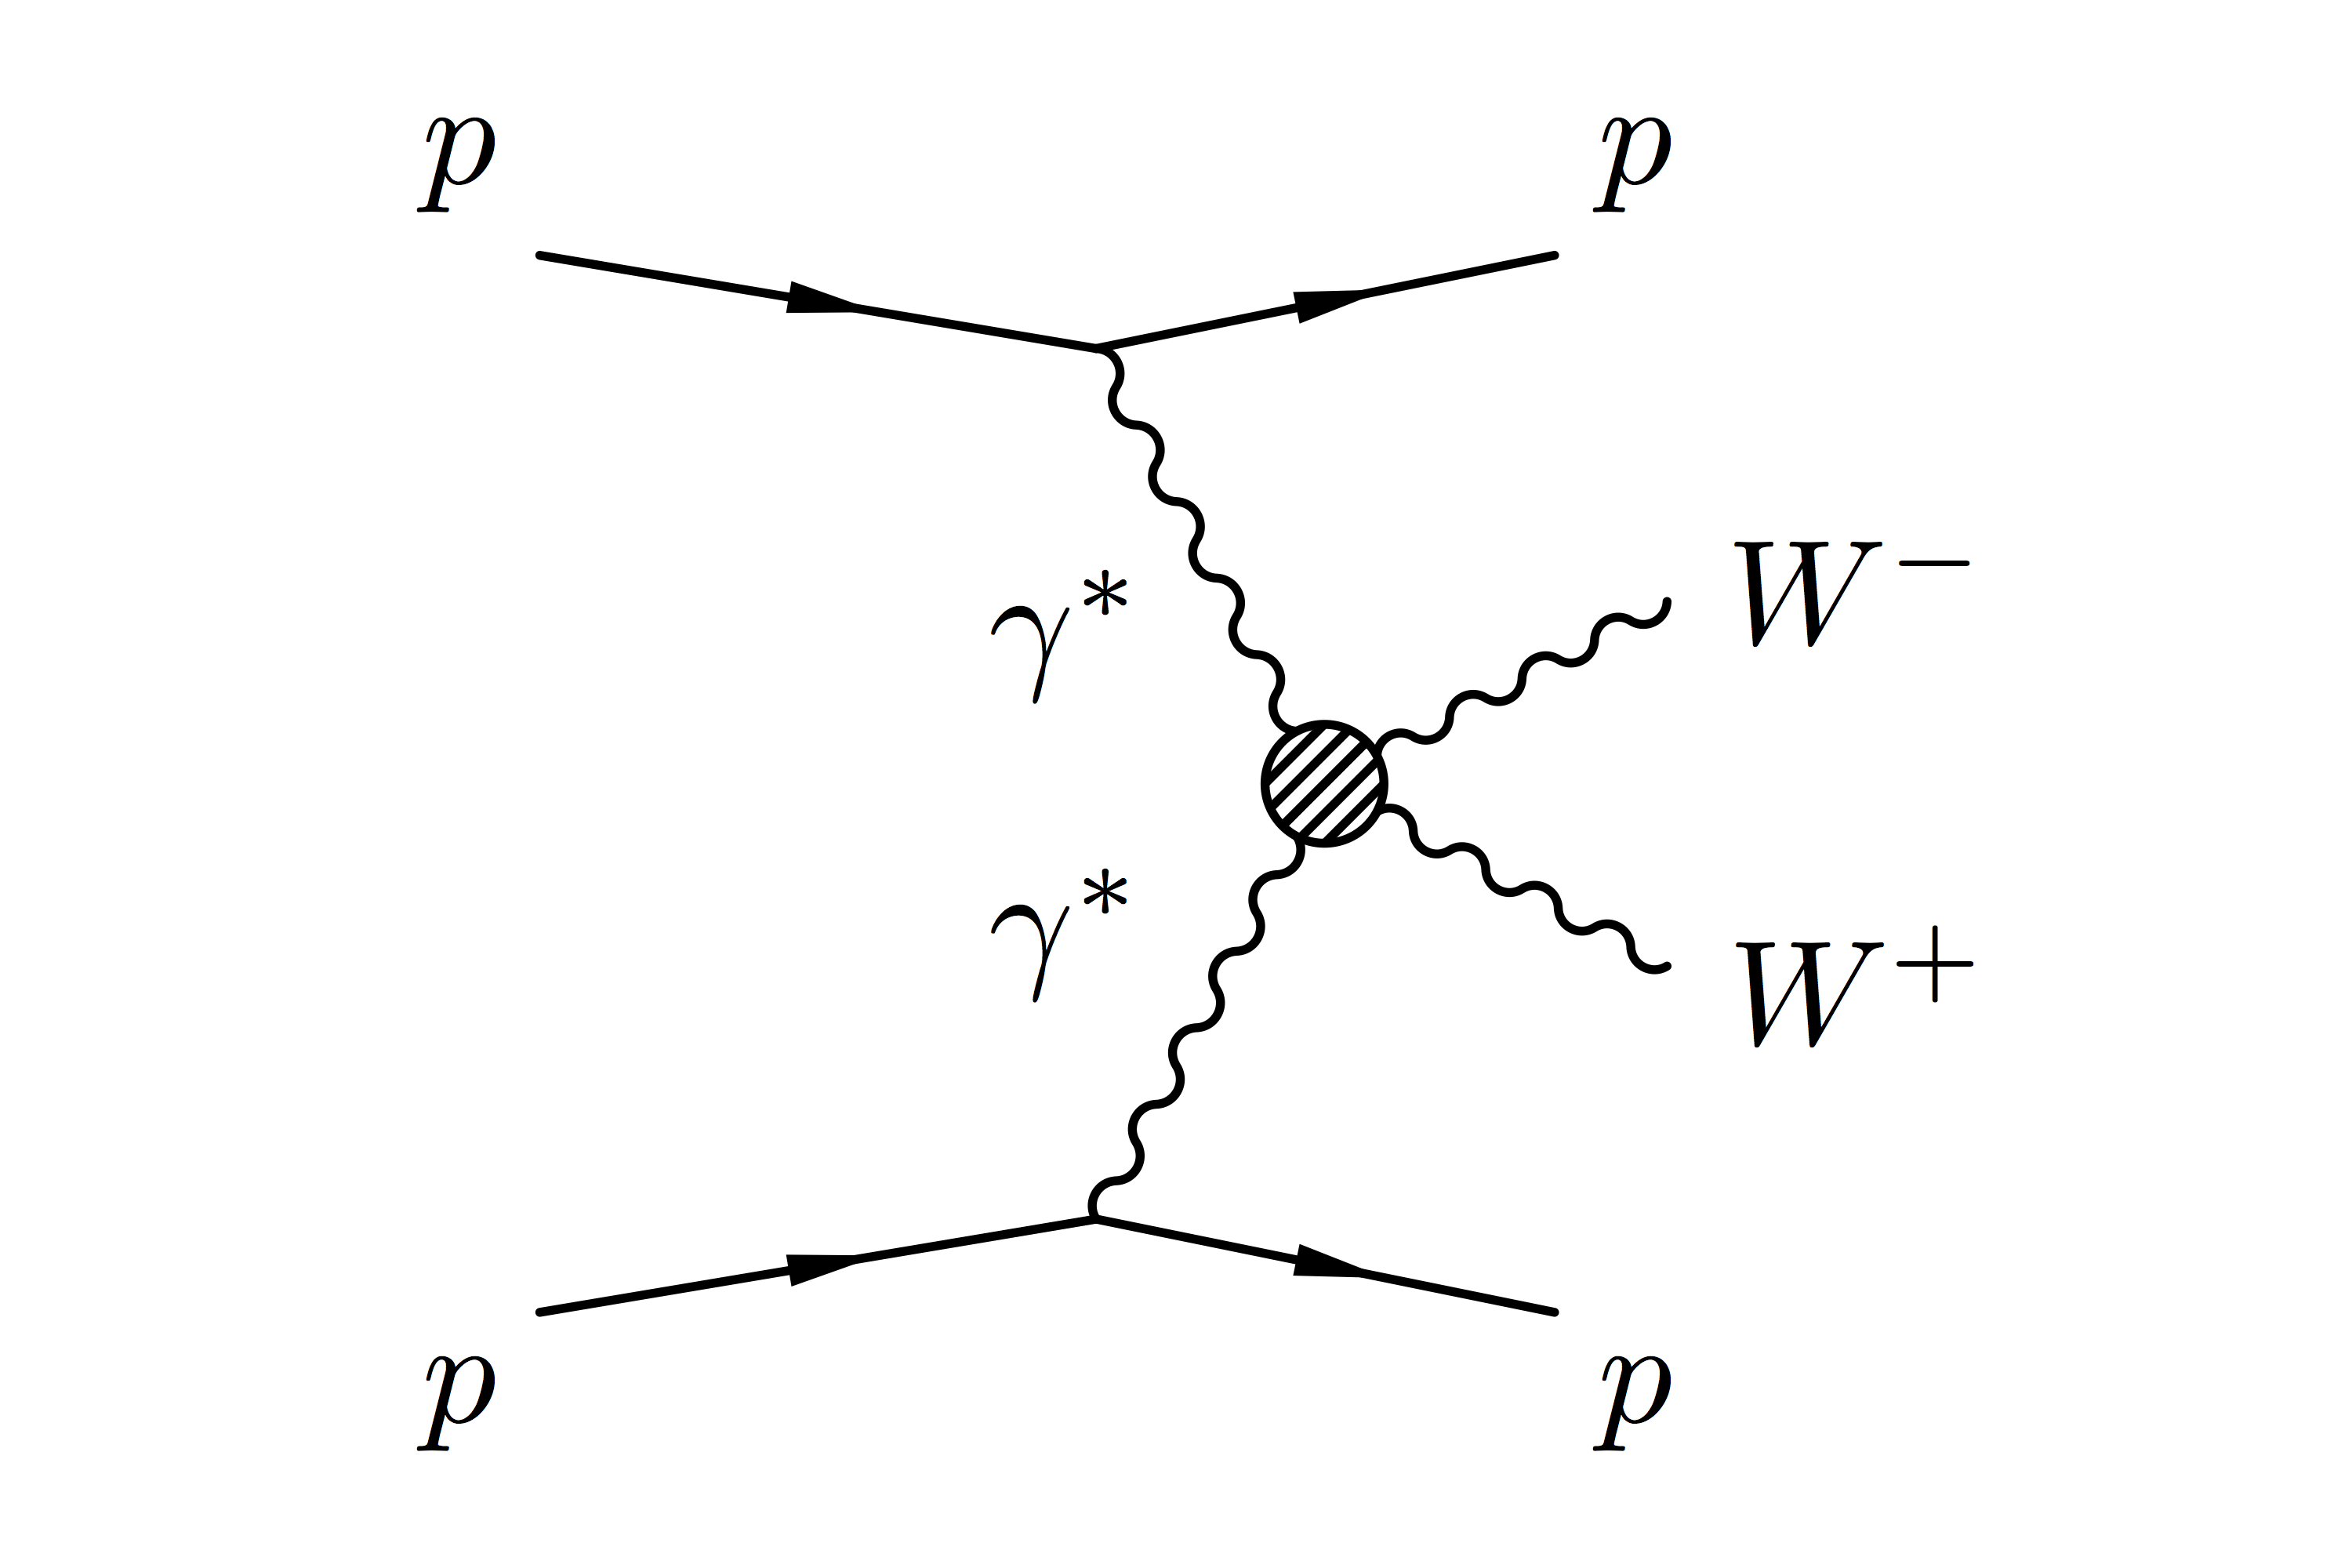 Quartic gauge coupling: A Feynman diagram showing how protons radiate photons that then interact and produce W bosons.